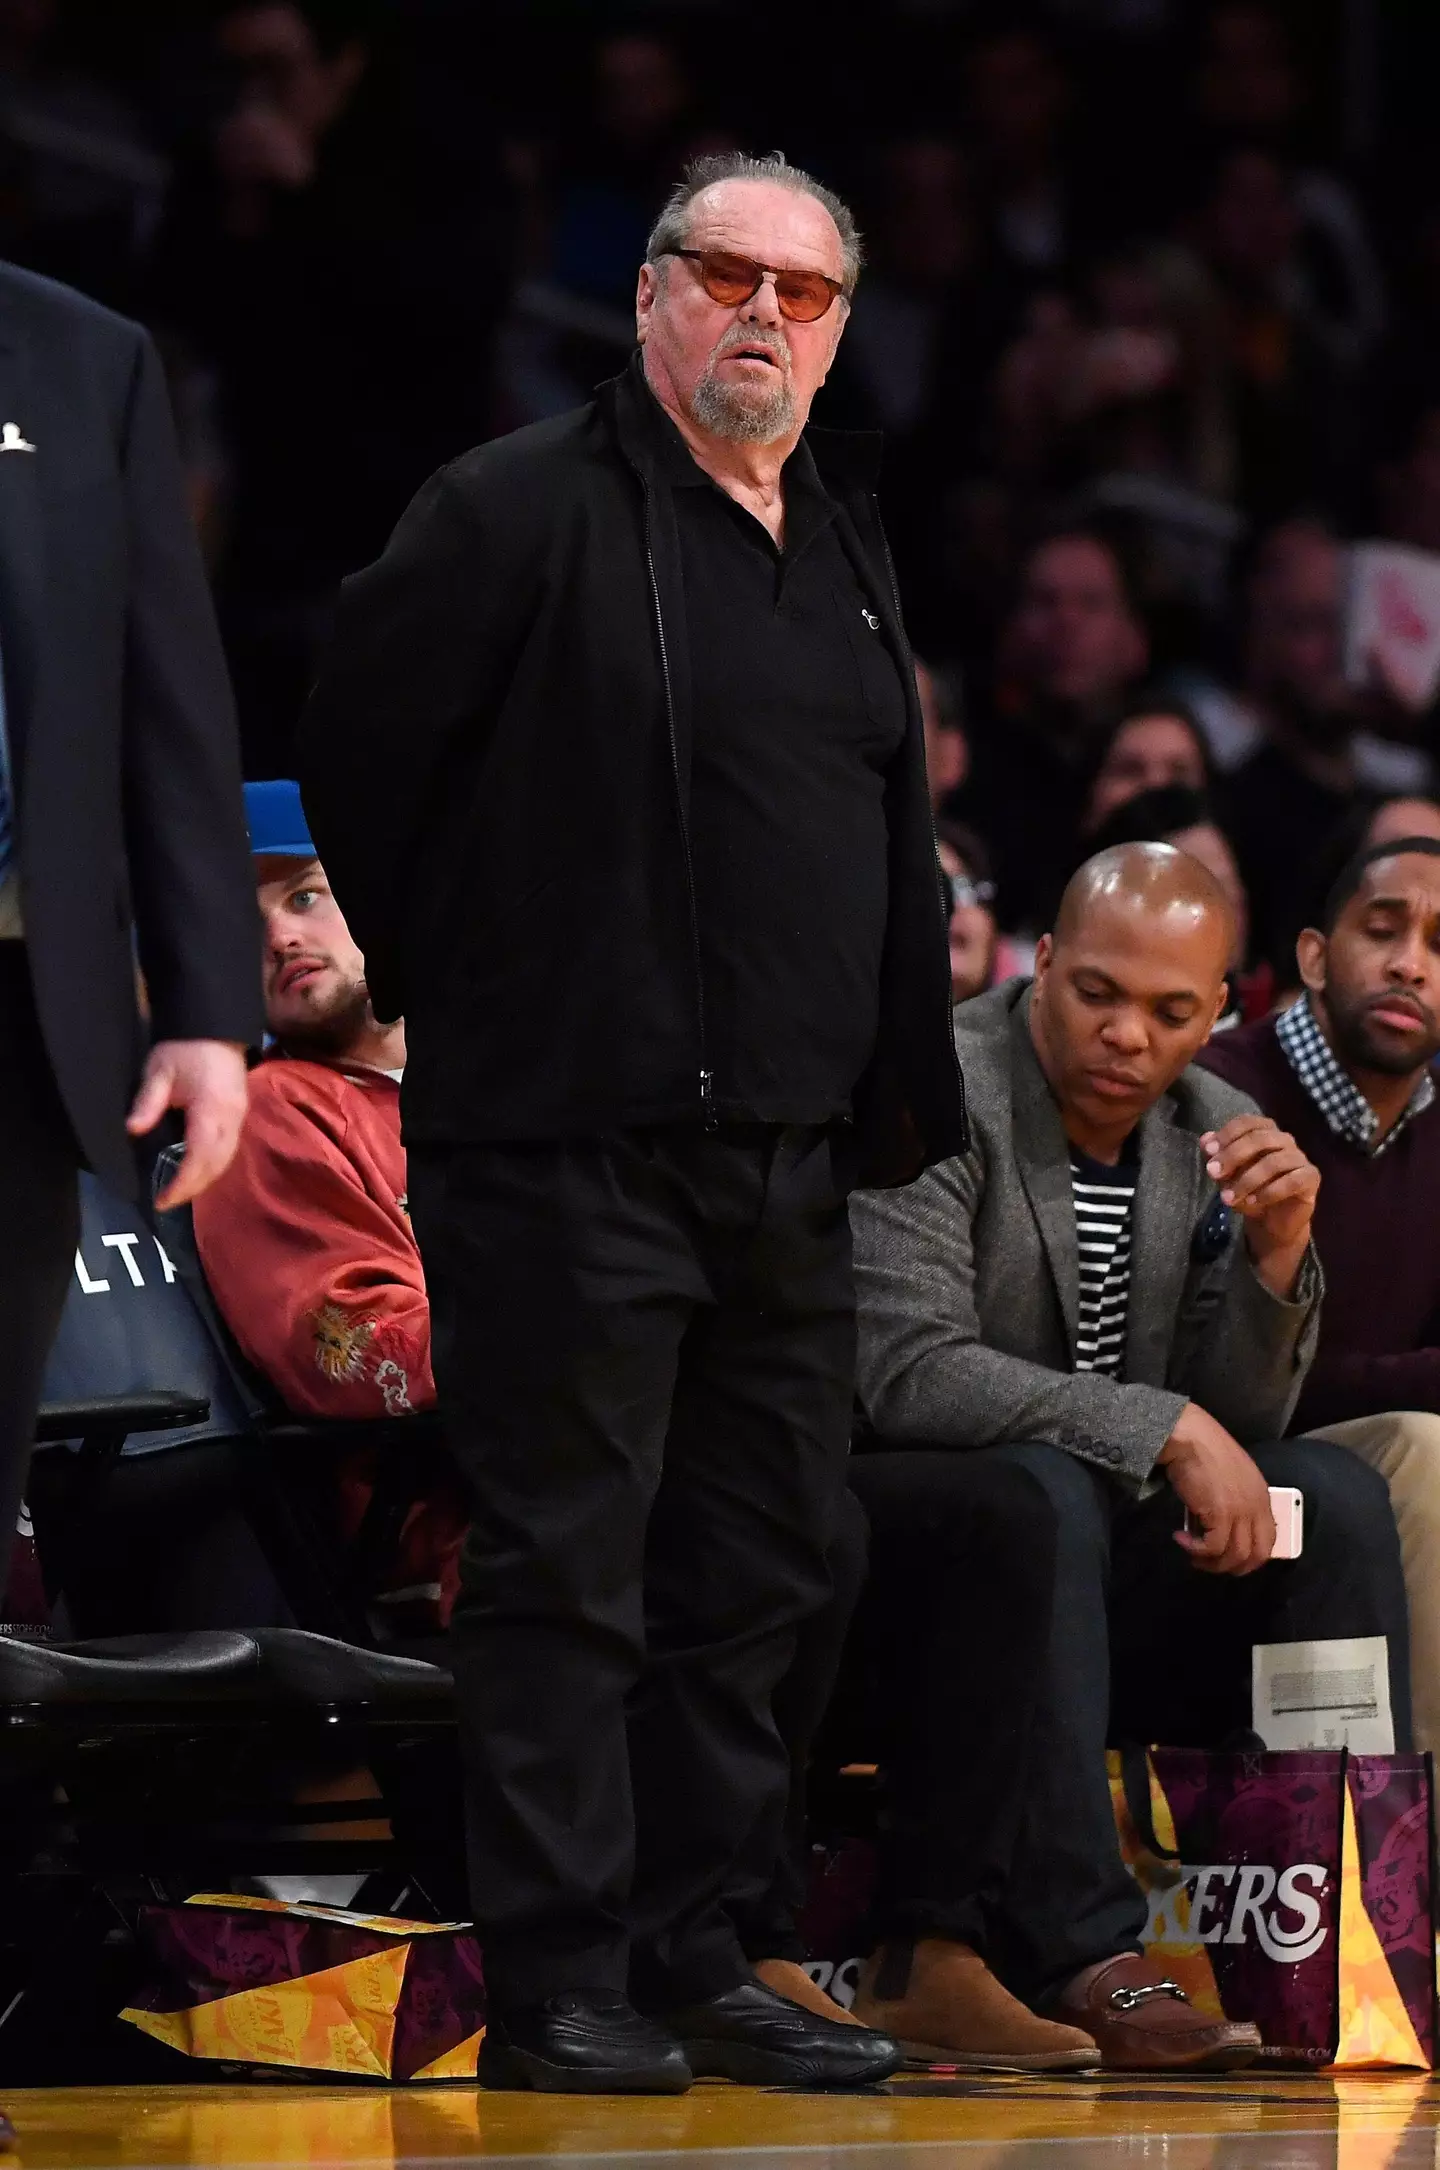 Nicholson pictured at a LA Lakers game.